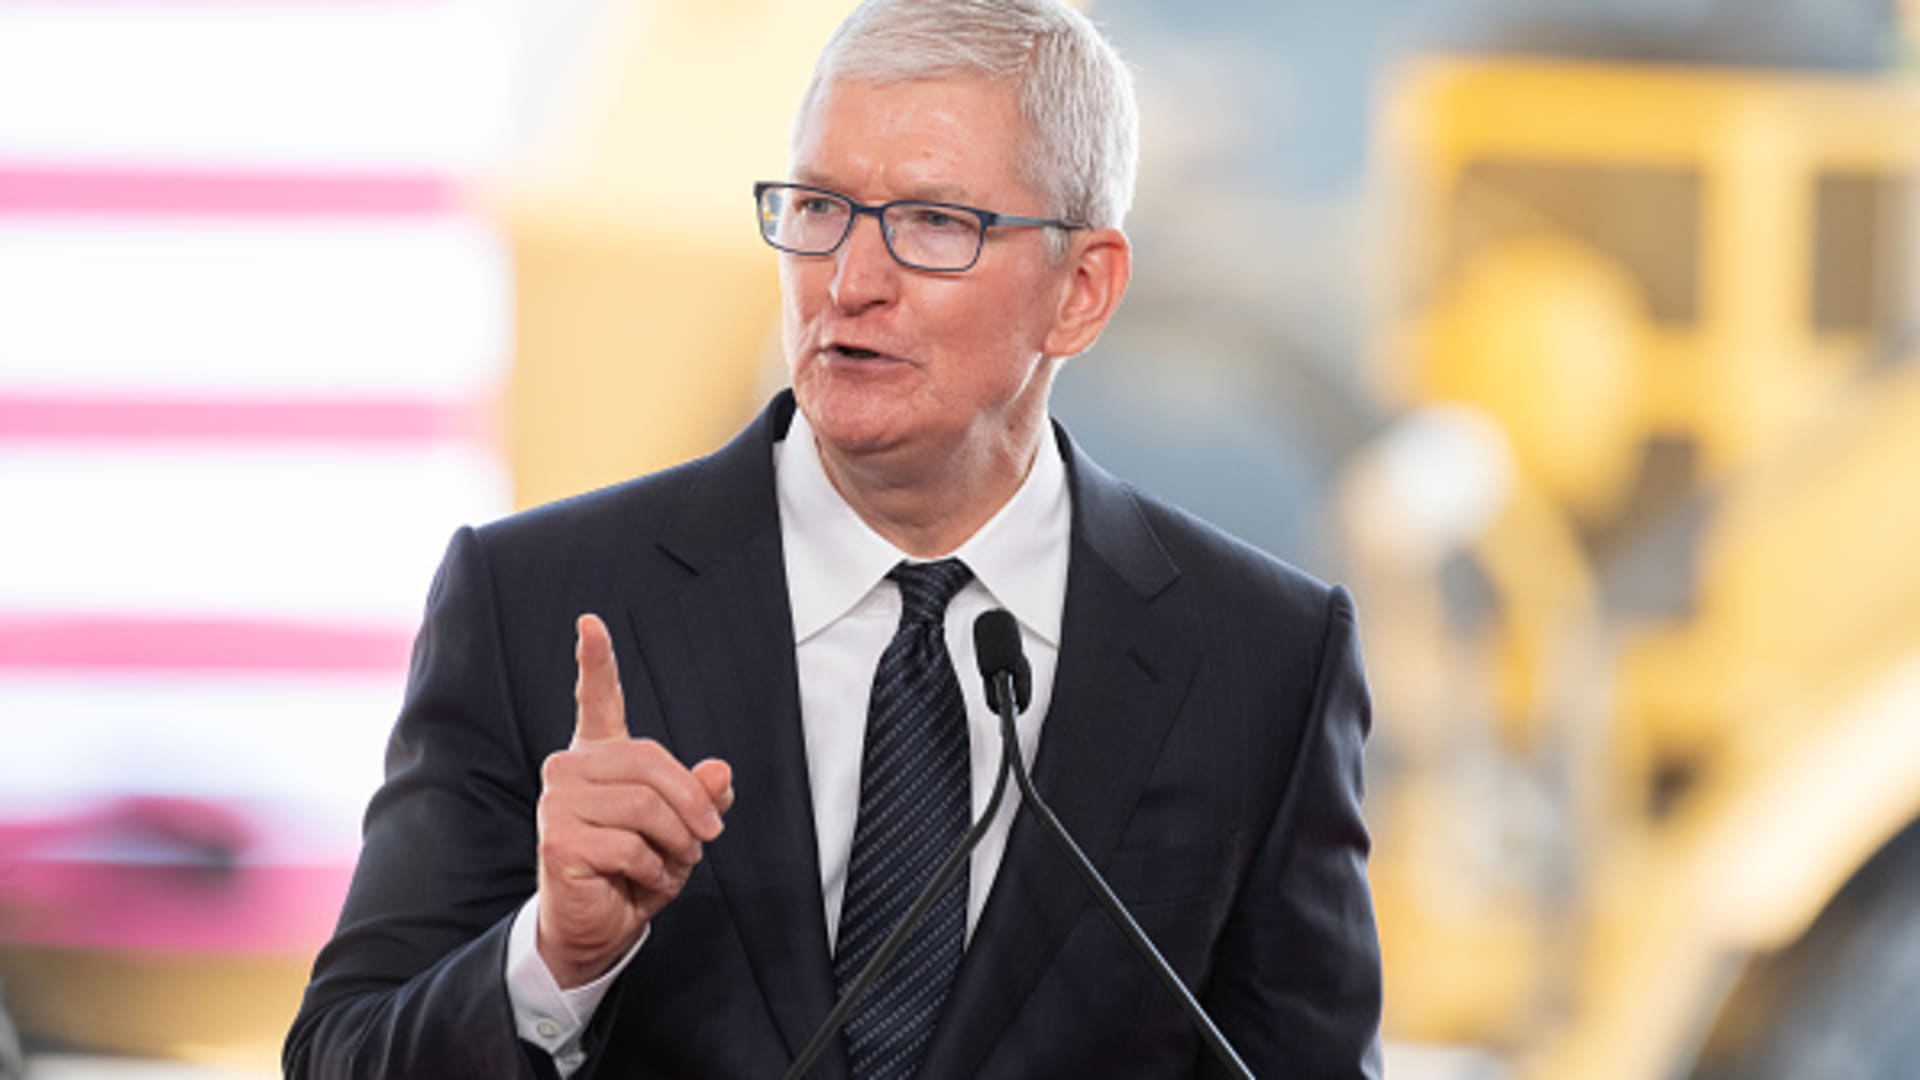 Apple reports earnings after the bell Thursday